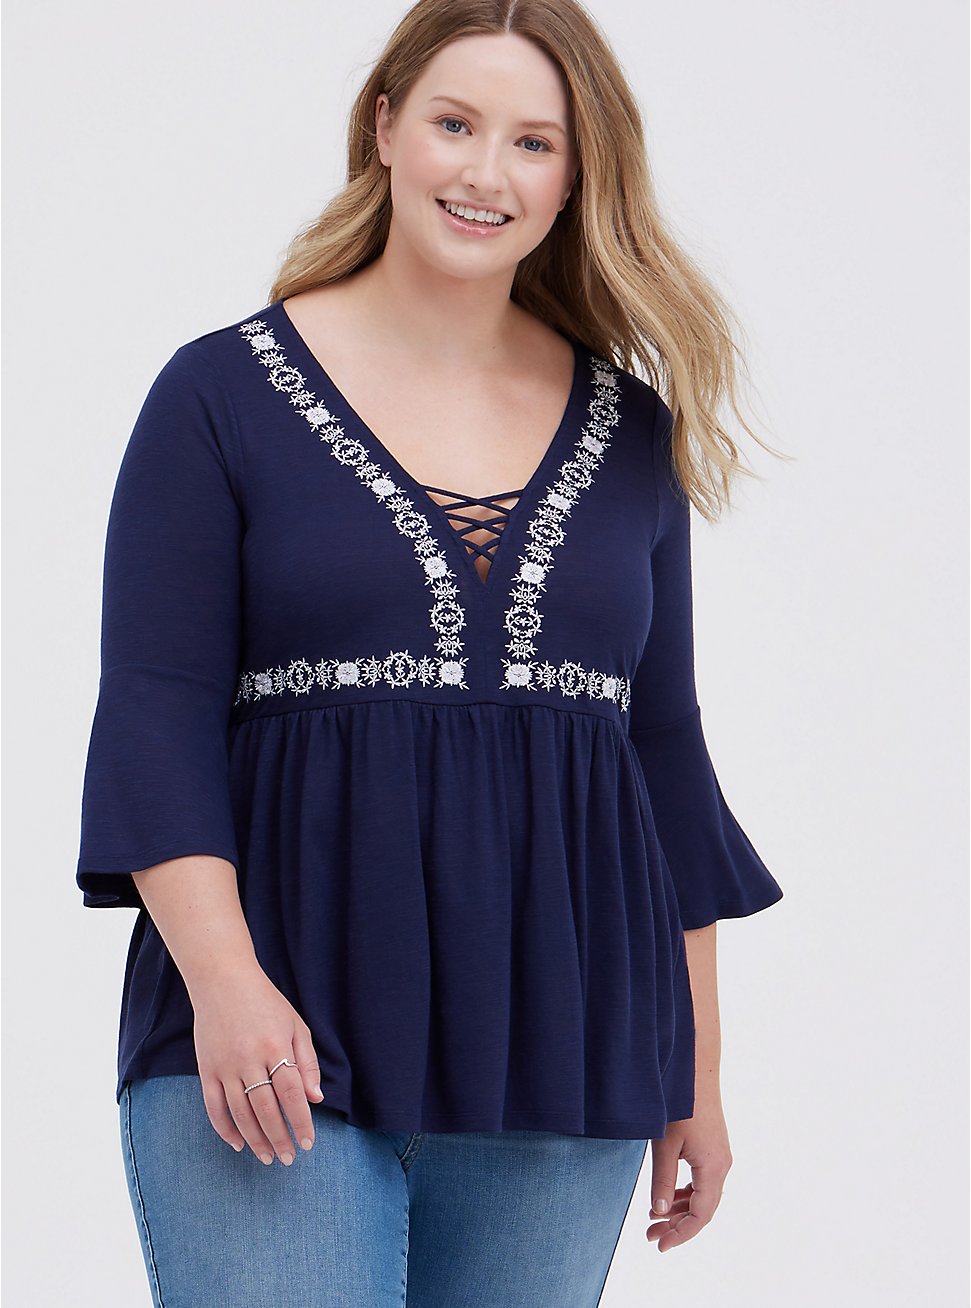 Plus Size Lace Up Babydoll Top - Navy, PEACOAT, hi-res